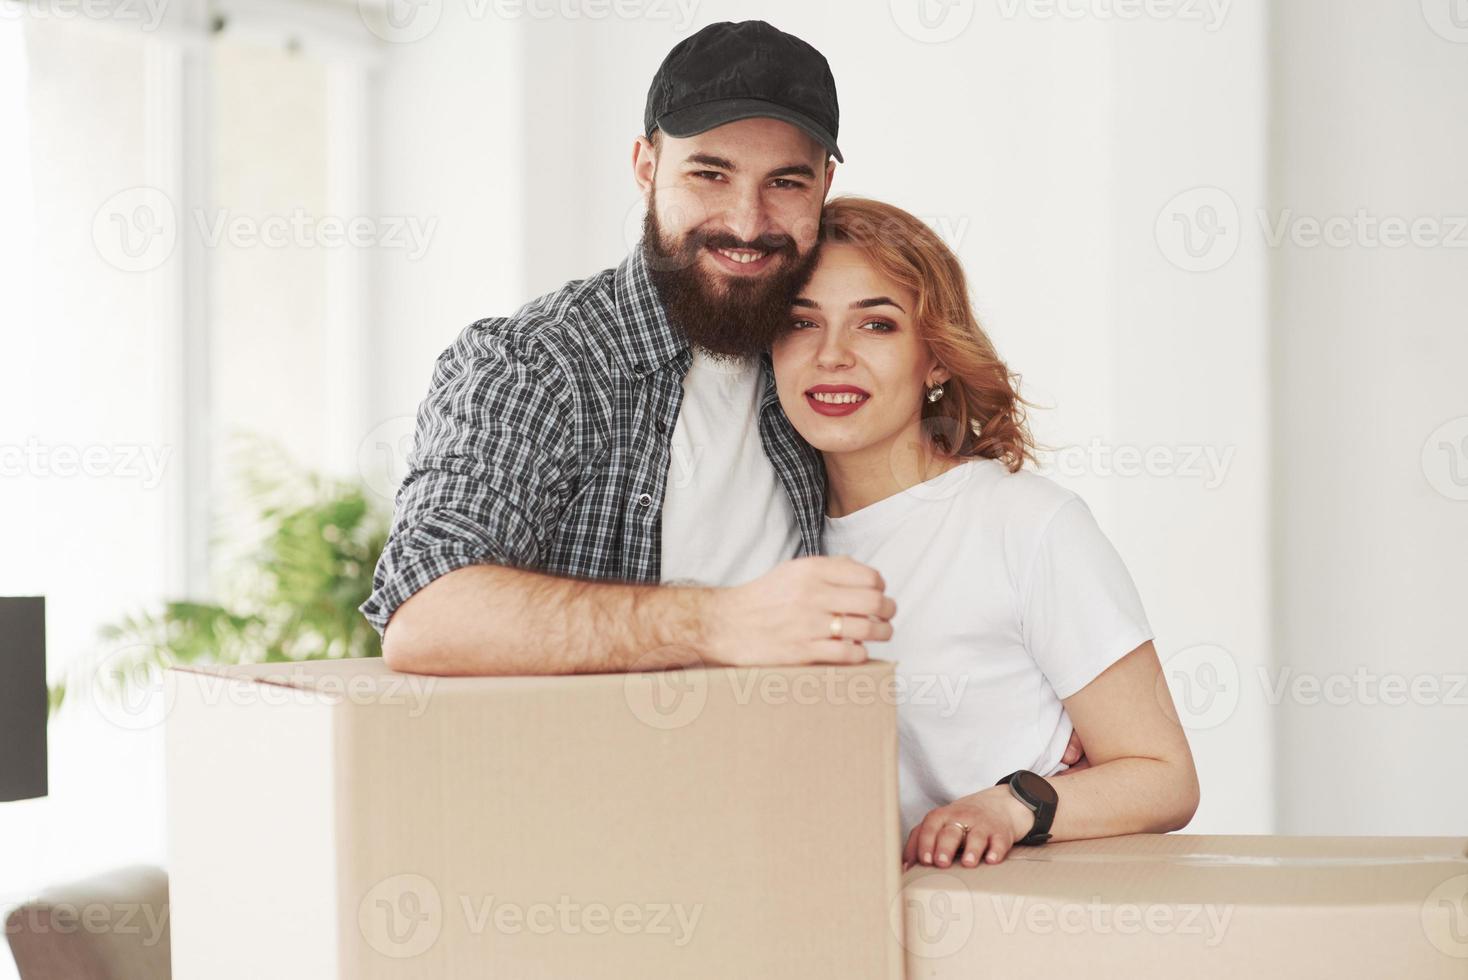 Posing for a camera. Happy couple together in their new house. Conception of moving photo